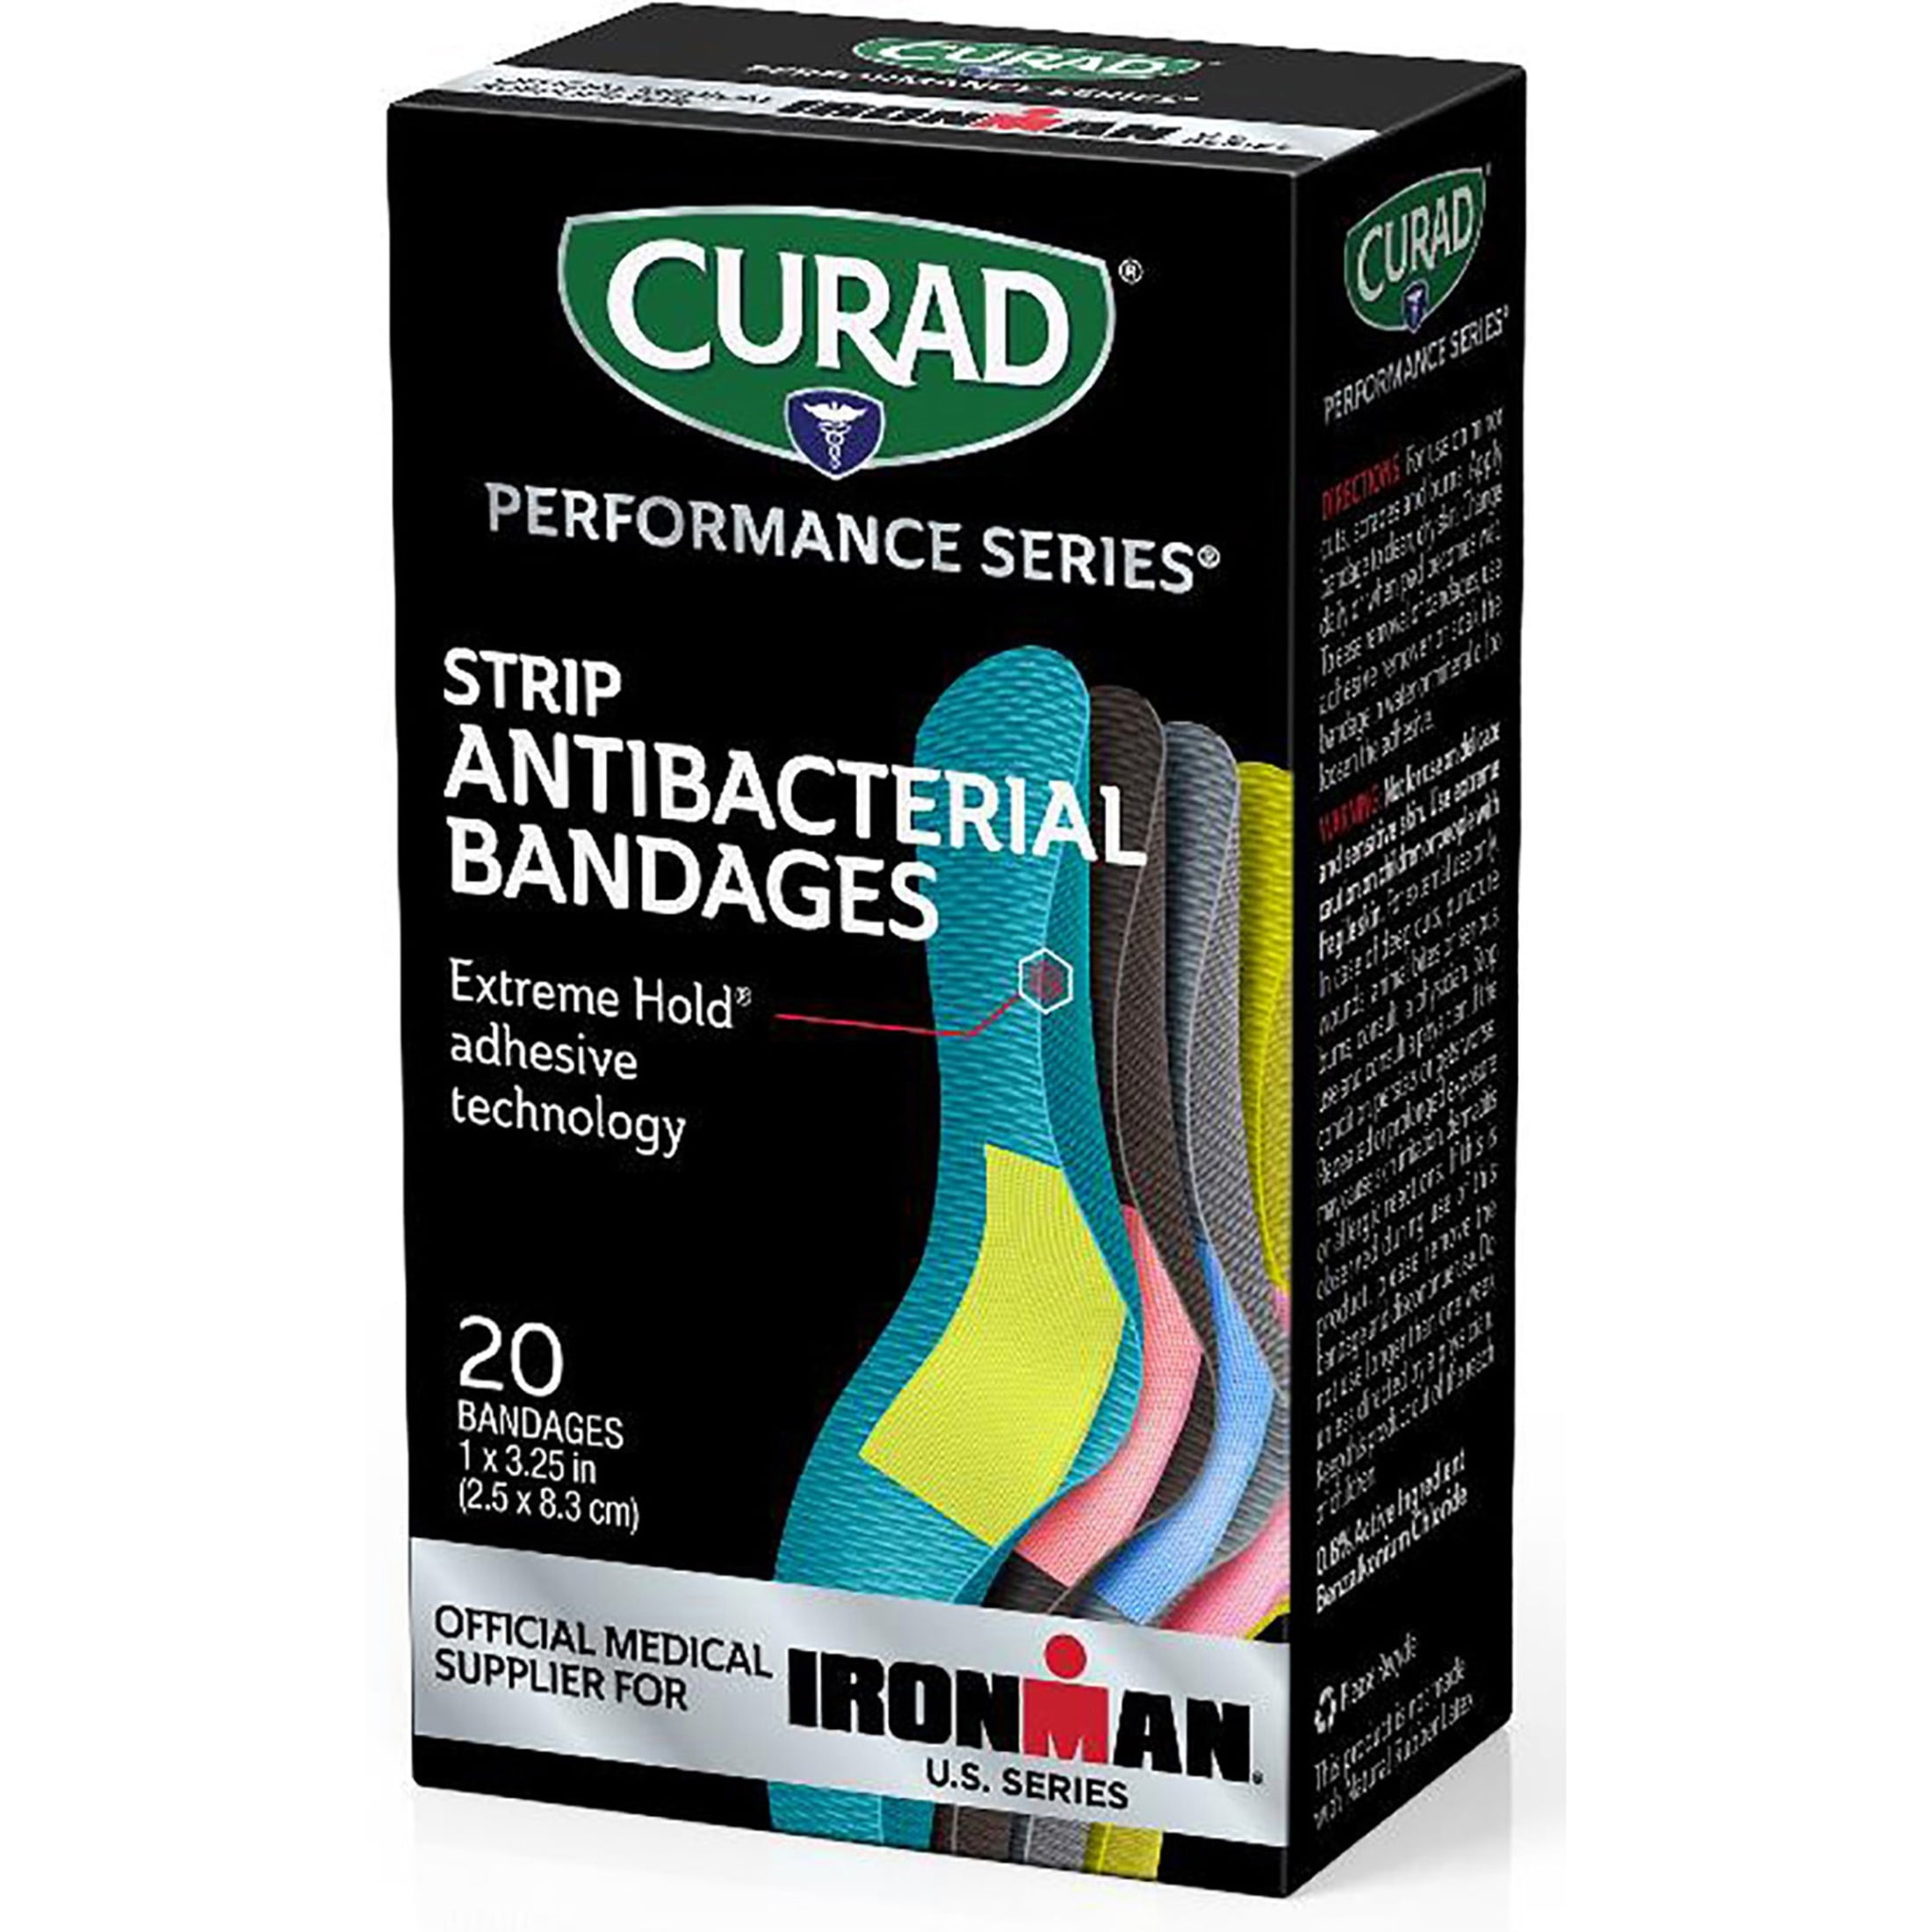 Curad Performance Series Ironman Antibacterial Fabric Bandages, Extreme Hold Adhesive Technology, 1" x 3.25", 20 Count